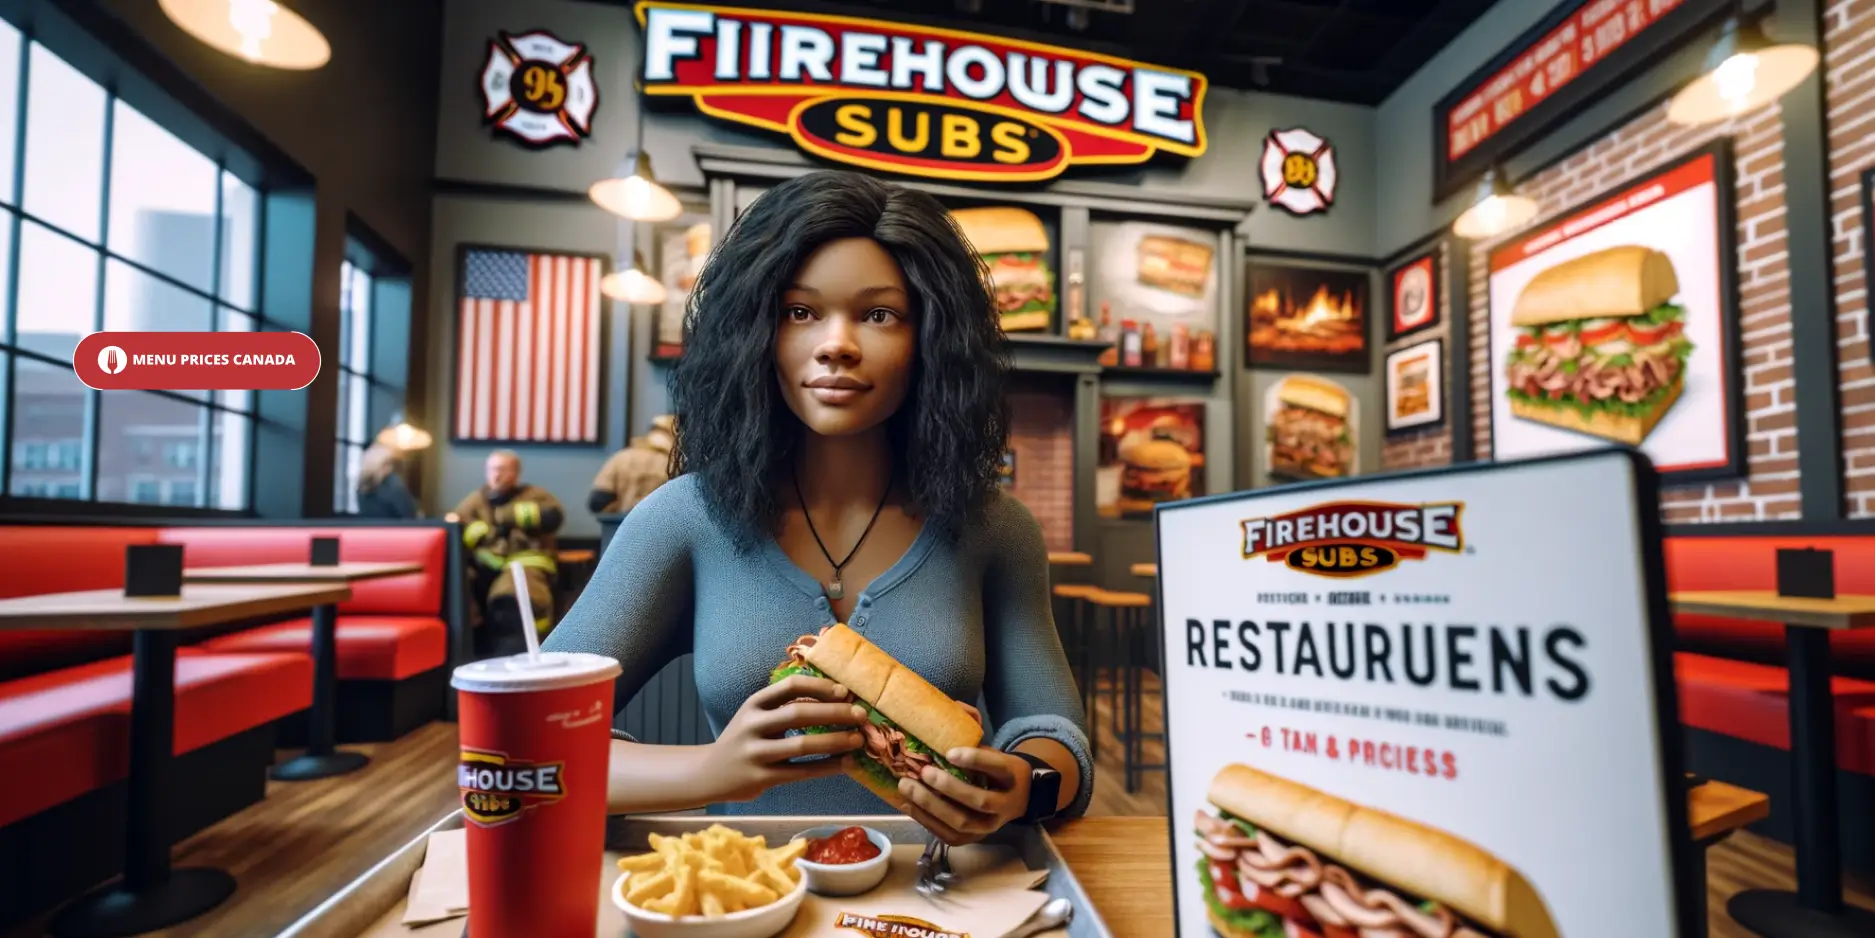 Firehouse-Subs-restaurant-Menu-Prices-Canada